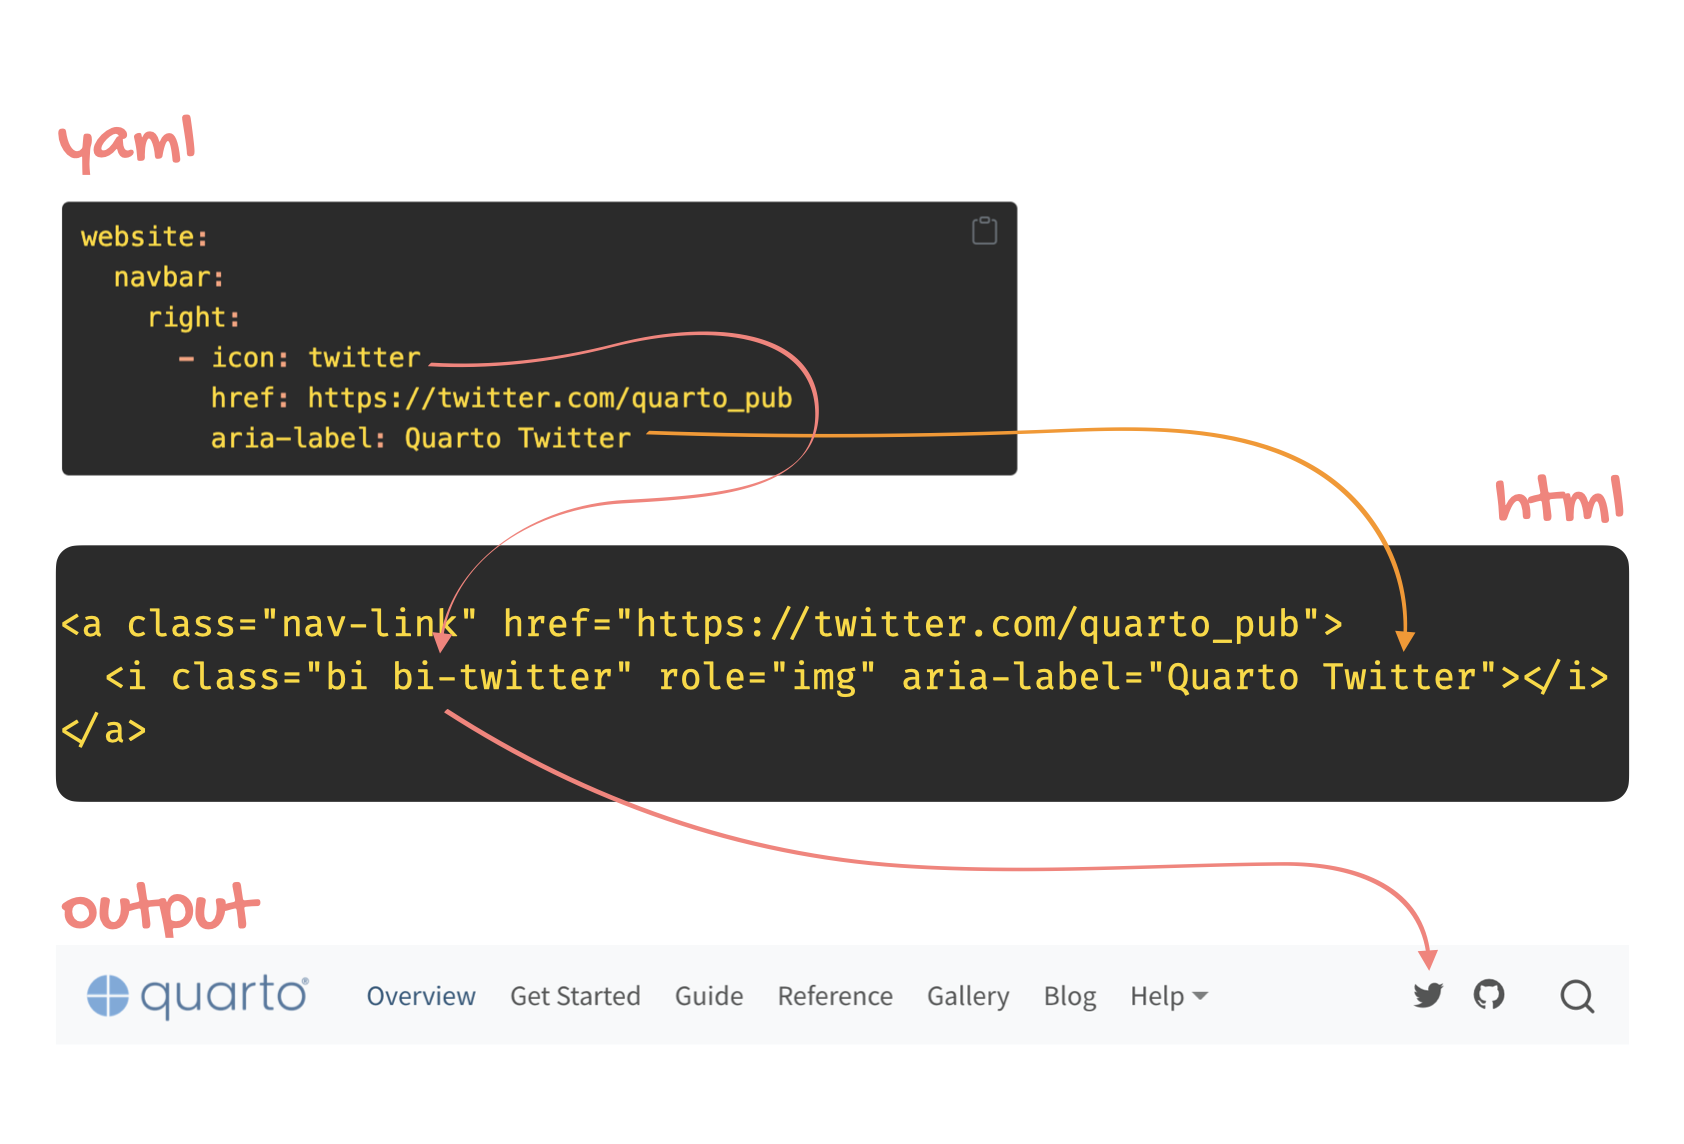 YAML definition for adding the twitter icon and aria-label to the Quarto documentation site. The resulting html which shows an icon, a link, and an aria-label. And the output, the Twitter icon on the navbar.